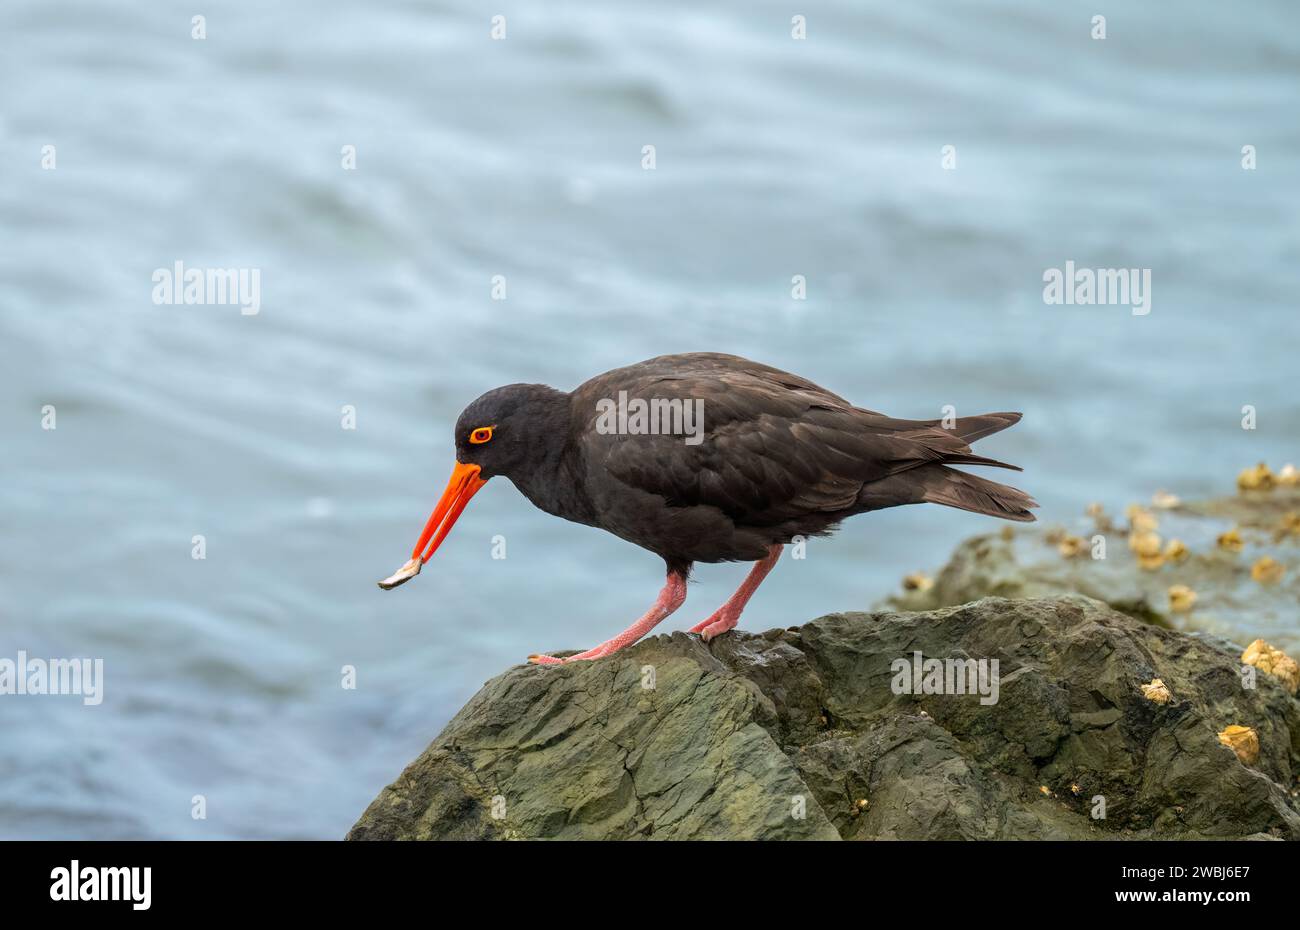 The Sooty Oystercatcher (Haematopus fuliginosus)  black shorebird with a long orange-red bill, red eyes and stout red-pink legs. Stock Photo